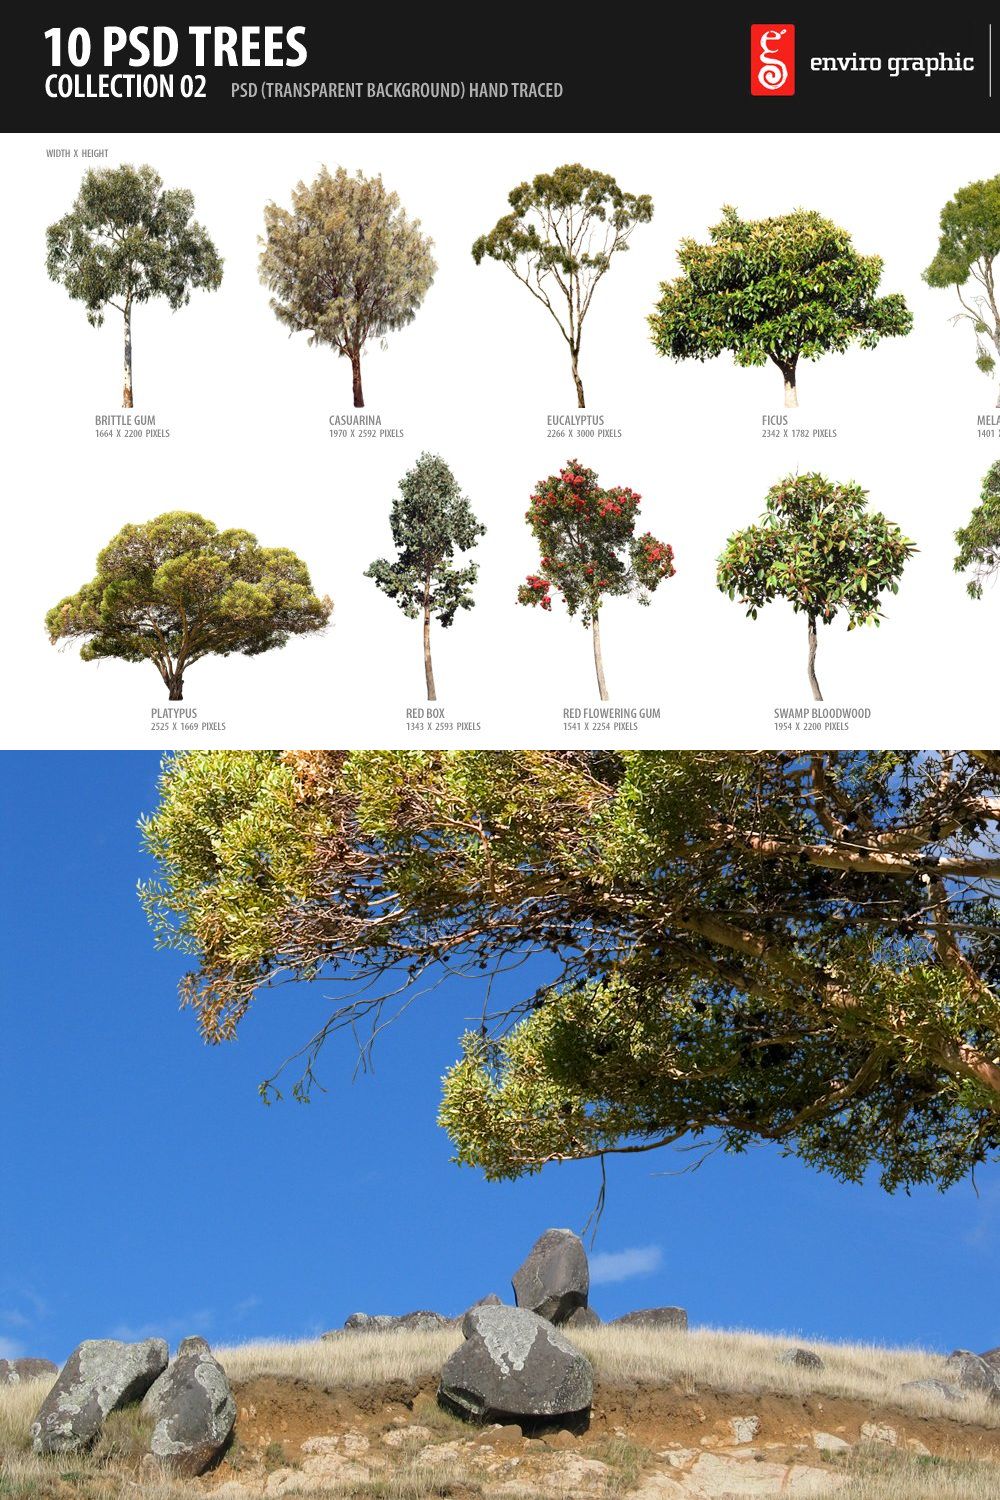 10 PSD Trees Collection 2 pinterest preview image.